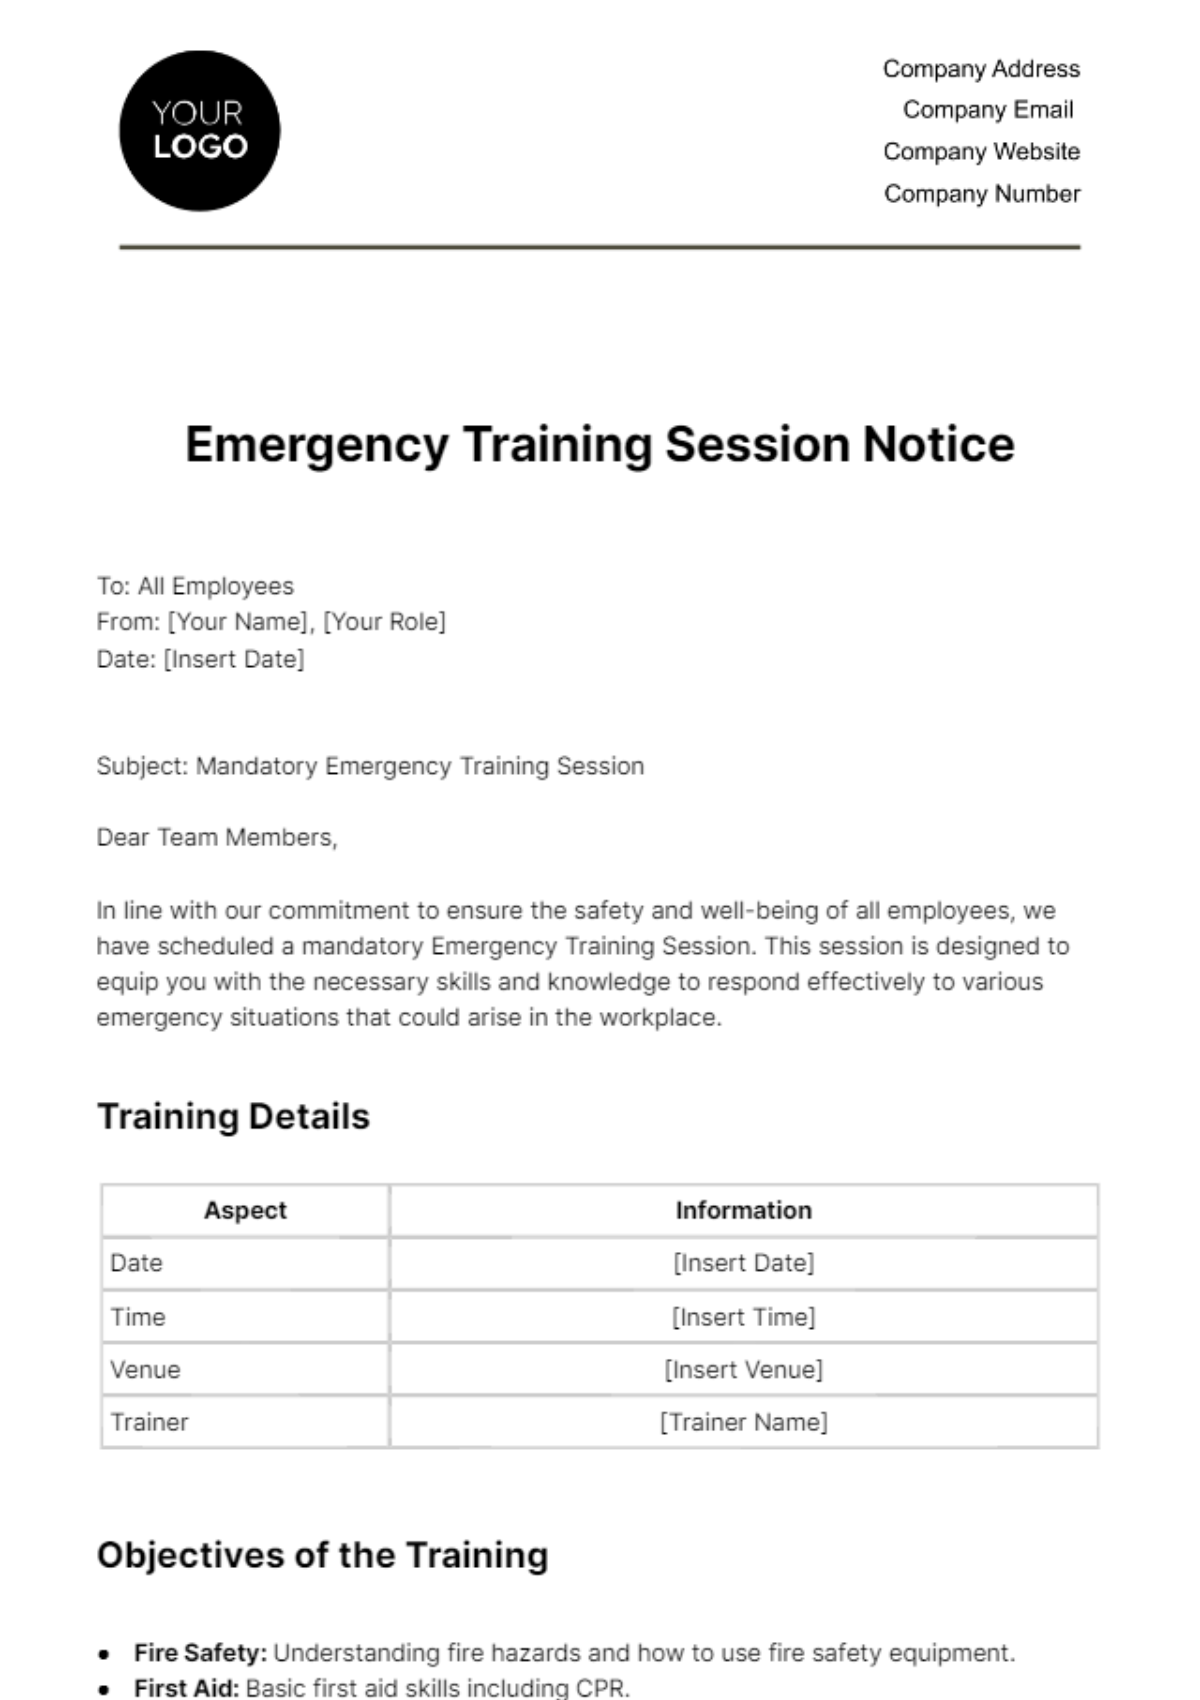 Emergency Training Session Notice HR Template